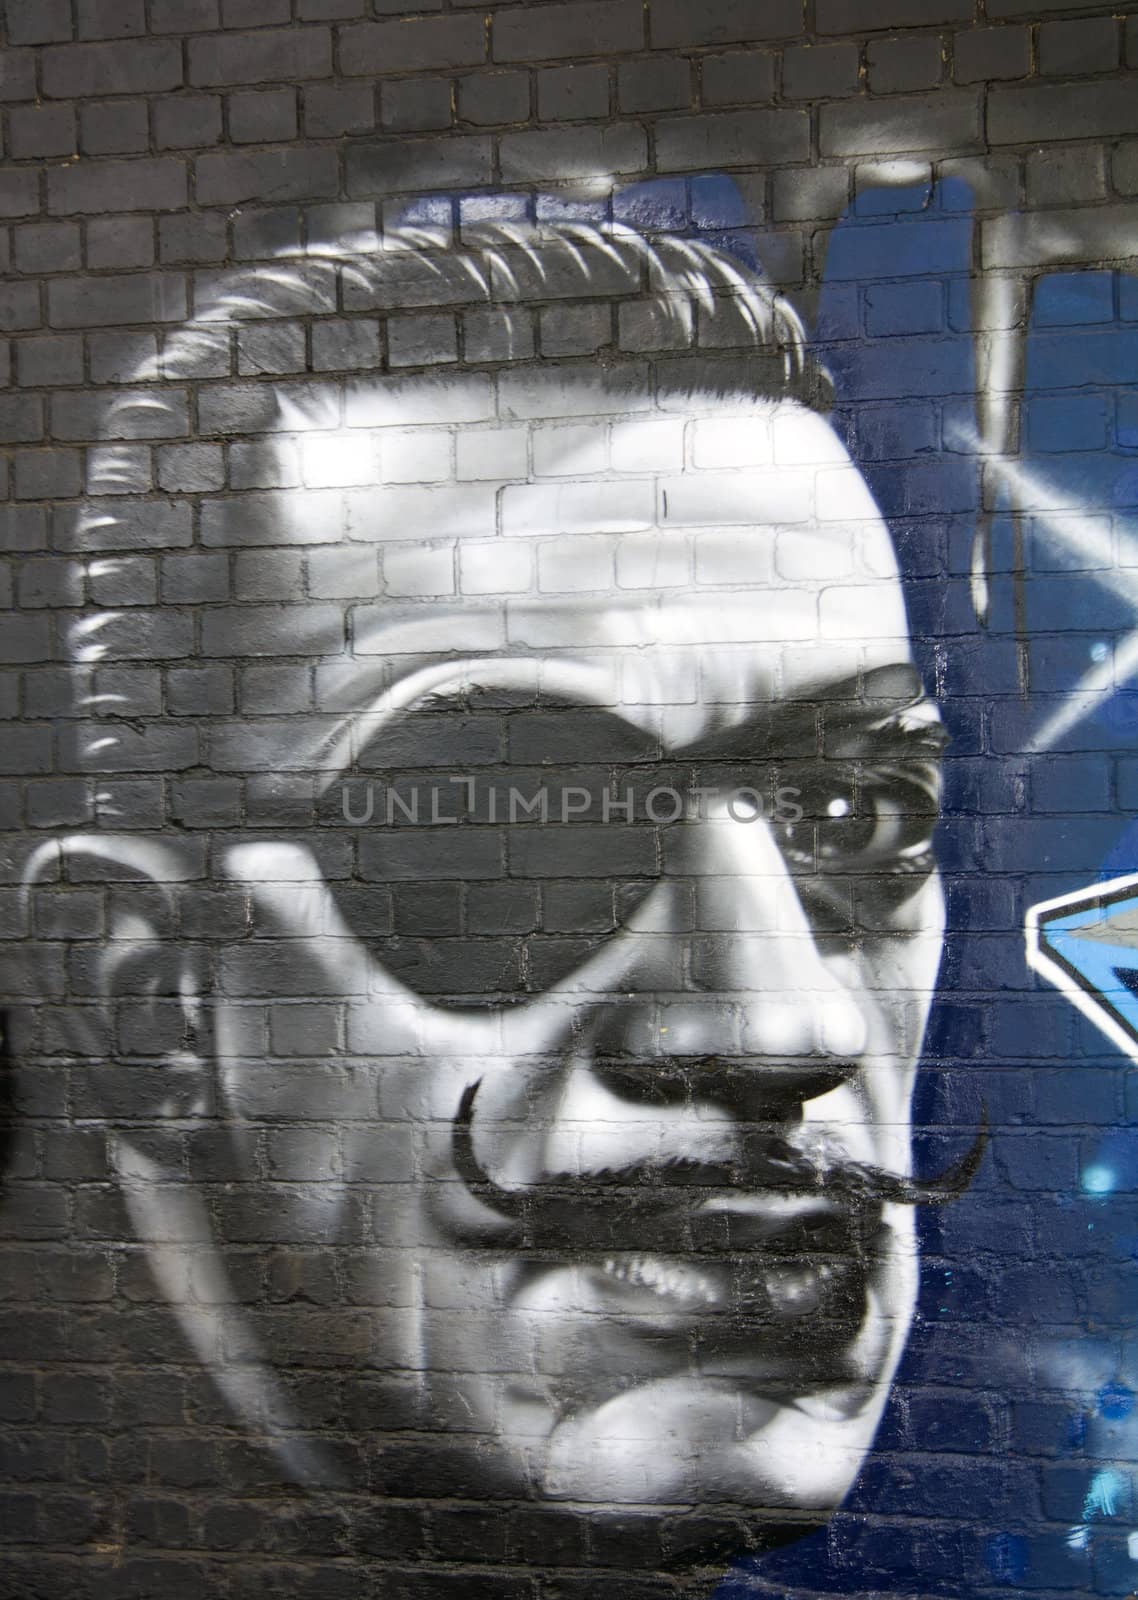 Graffiti on a wall depicting a man's face with a patch on his eye